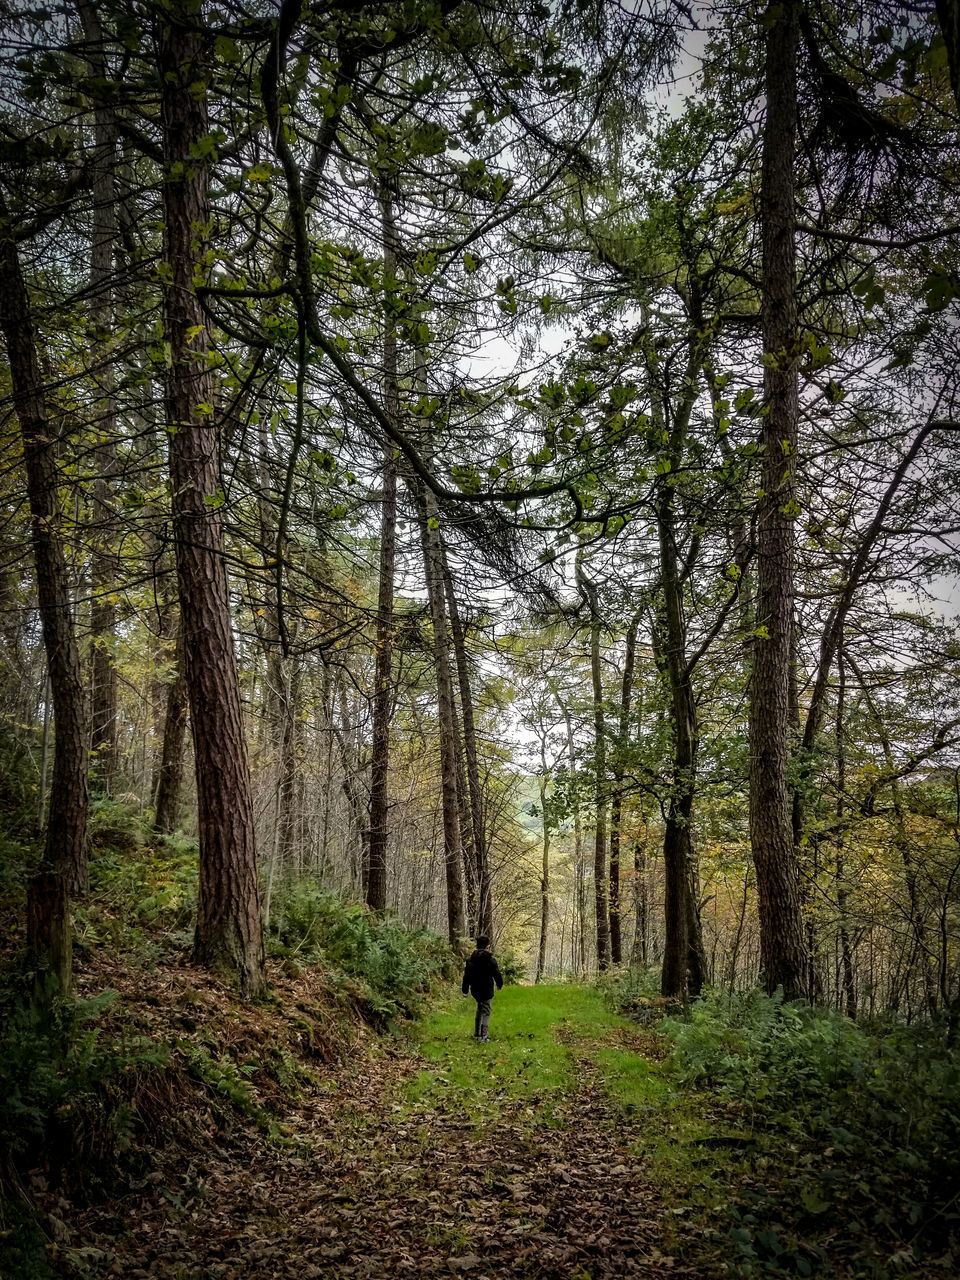 MAN WALKING AMIDST PLANTS IN FOREST